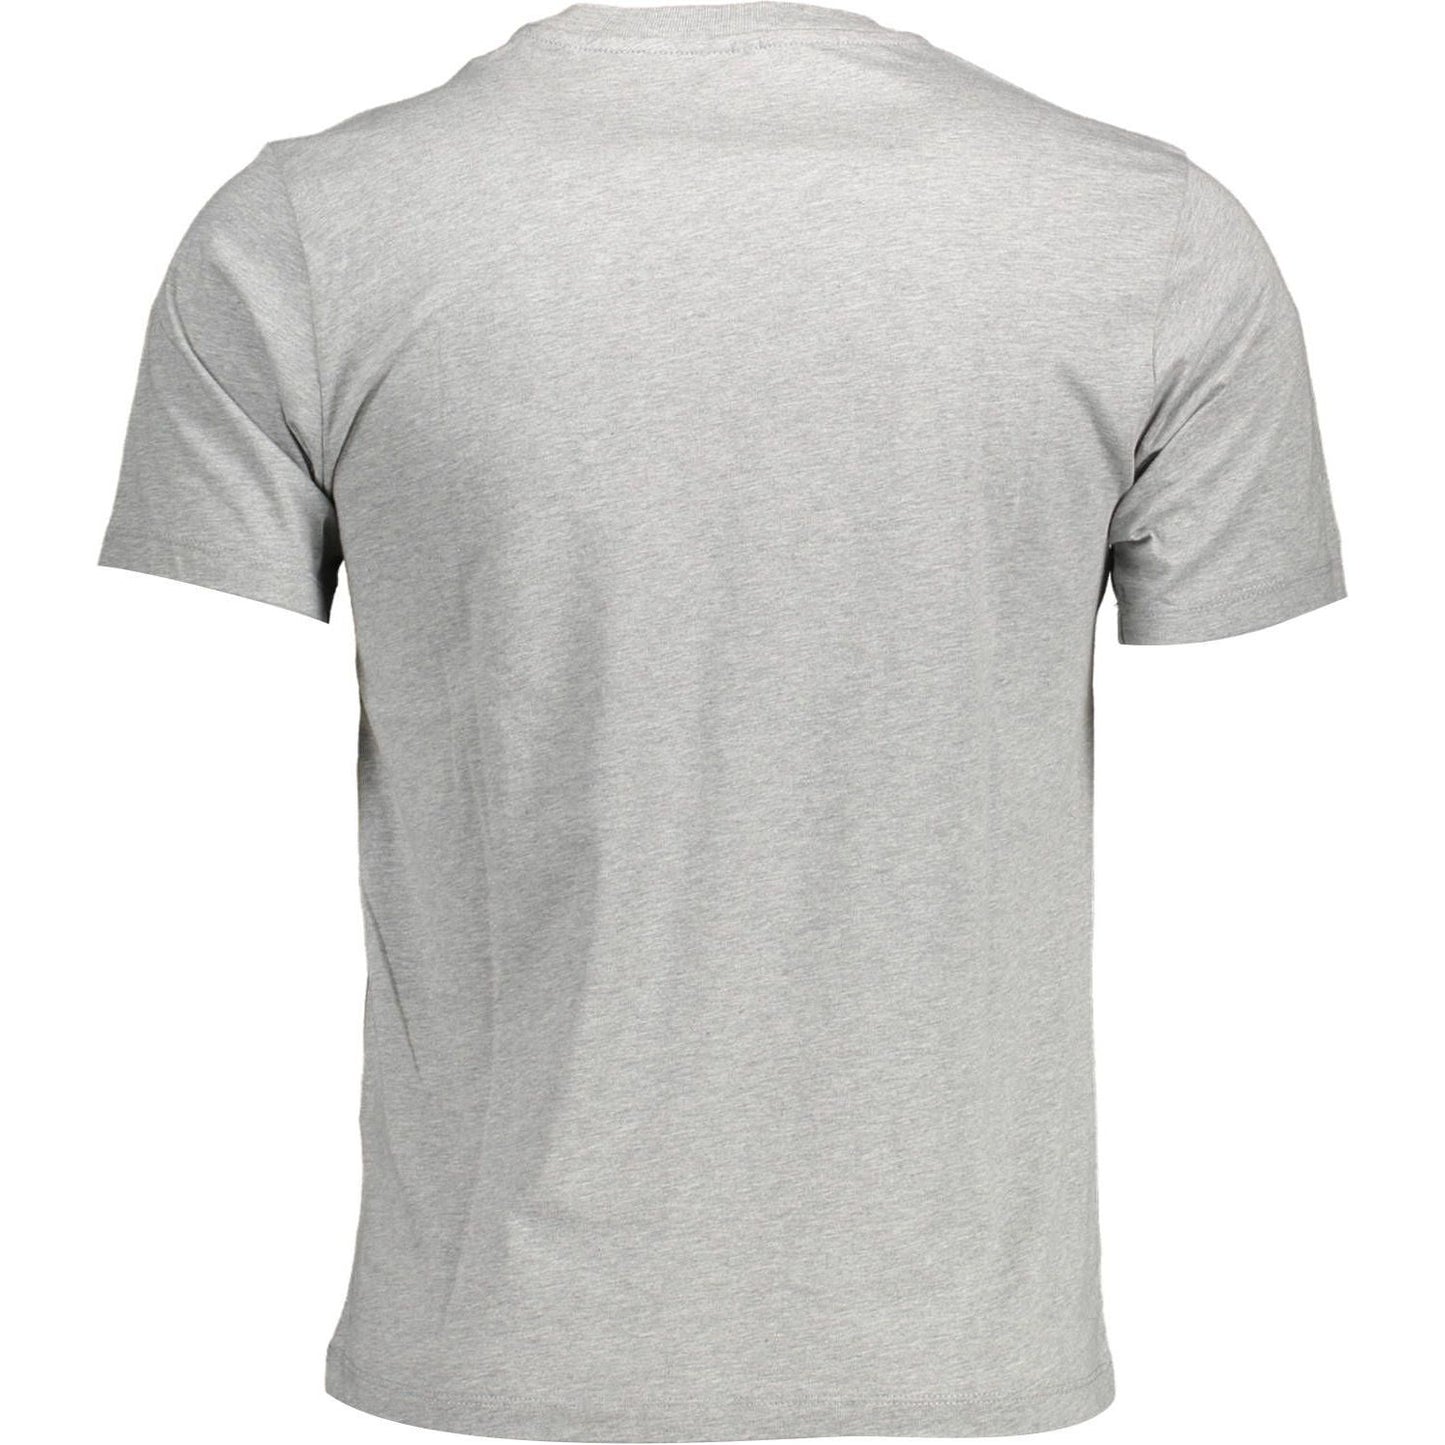 North Sails Elevated Casual Gray Cotton T-Shirt elevated-casual-gray-cotton-t-shirt